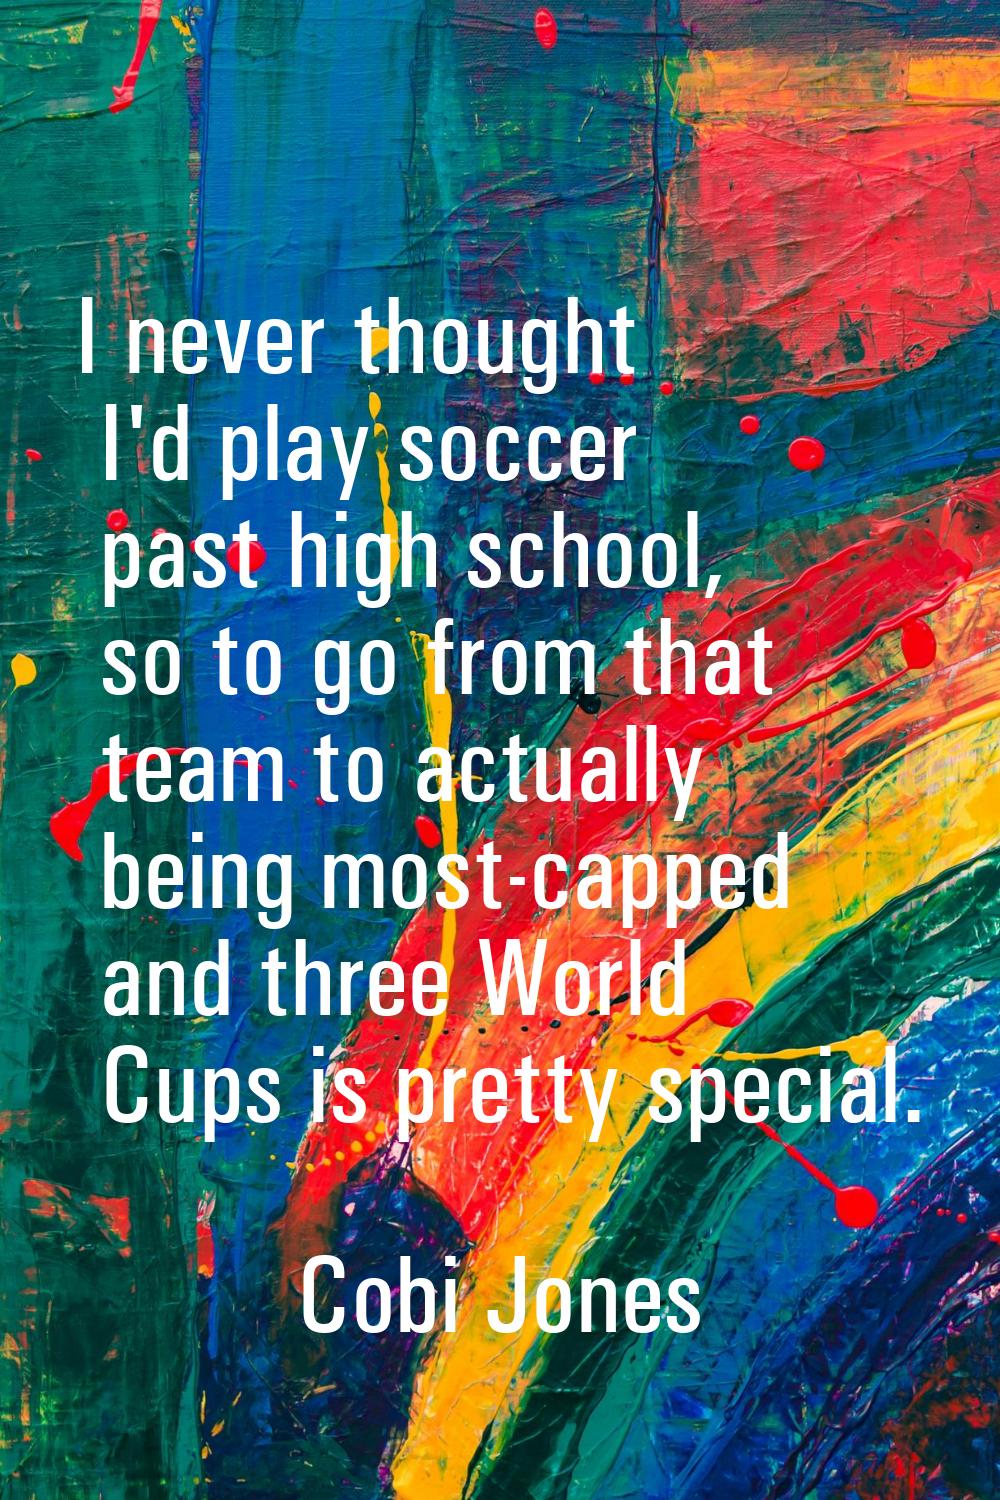 I never thought I'd play soccer past high school, so to go from that team to actually being most-ca